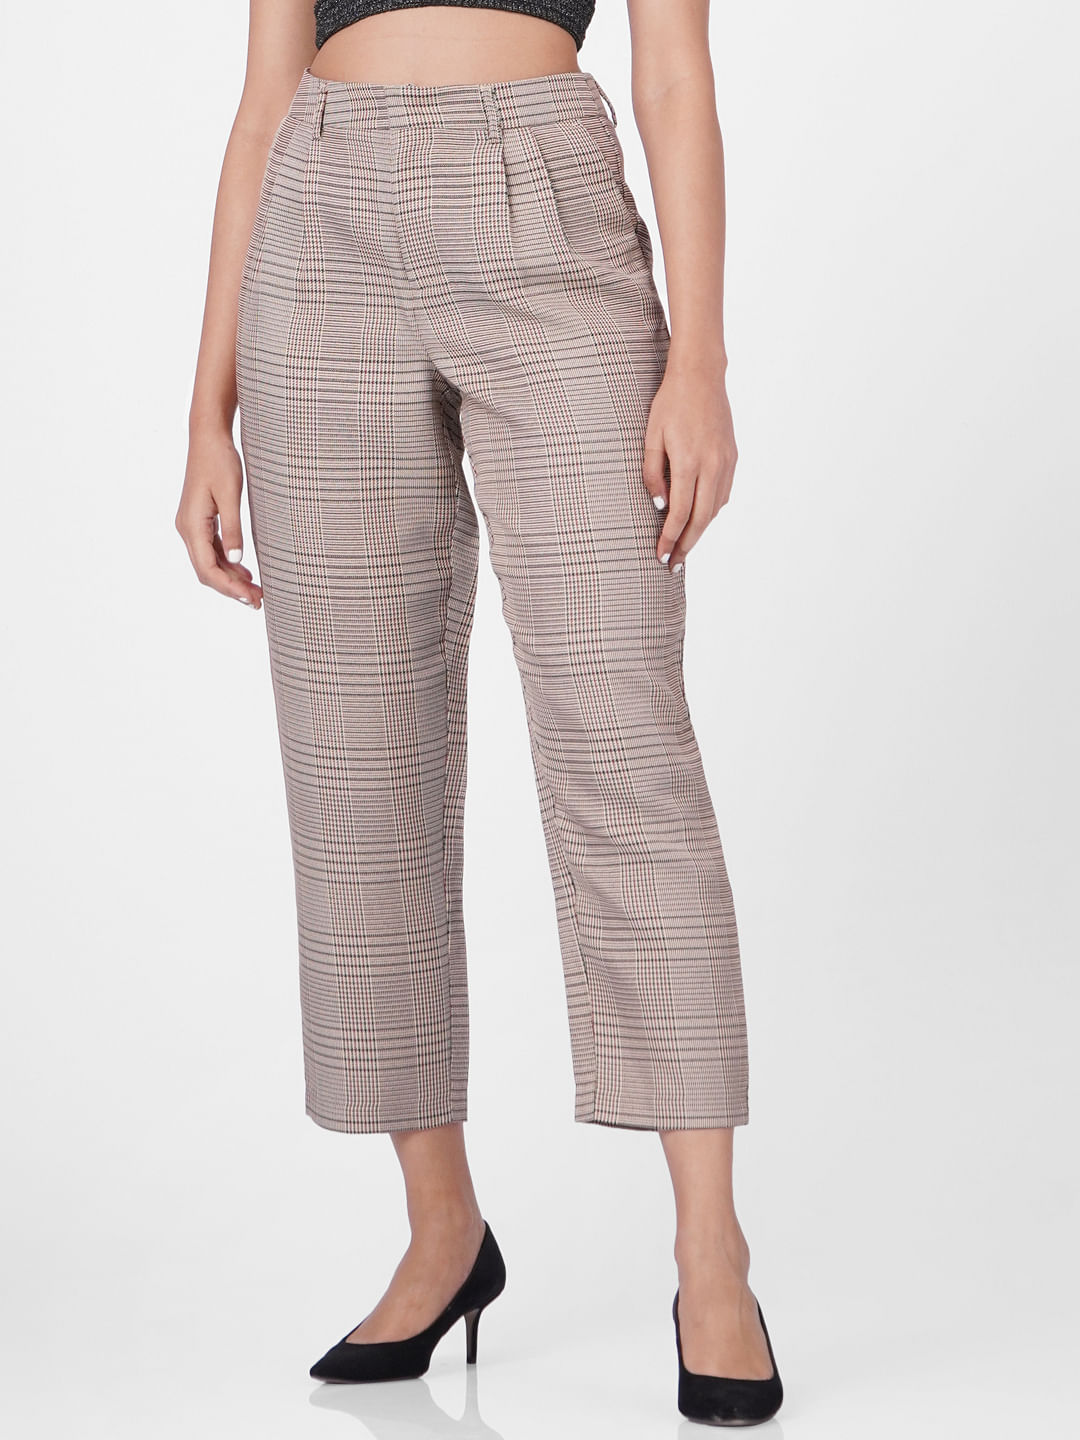 Balenciaga Ladies Black Flared Checked Trousers | World of Watches